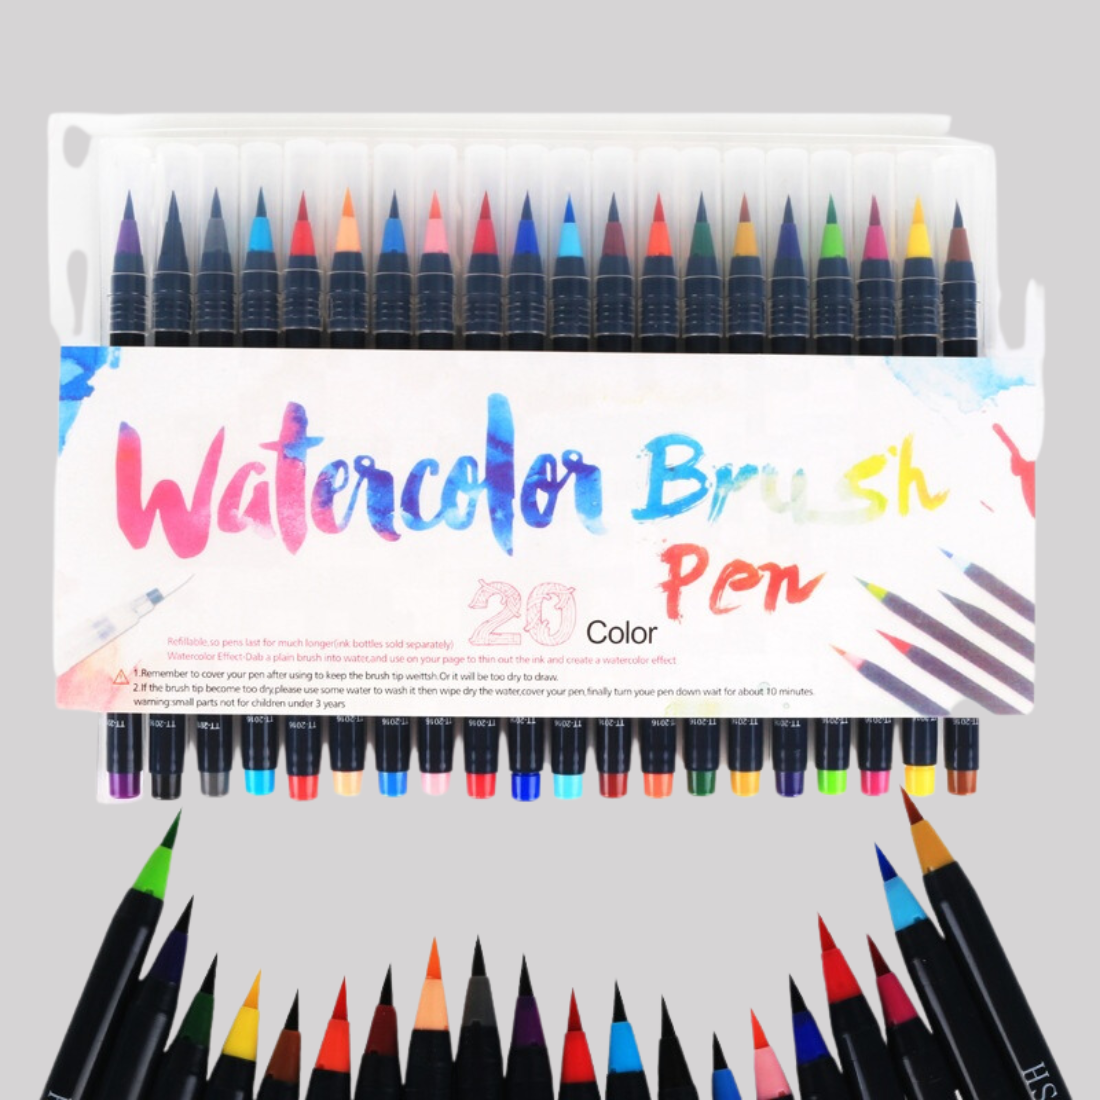 Watercolor Brush Pens, Set of 28 Colors Watercolor Markers and 2 Refillable  Water Pens, Flexible Real Brush Tips, Watercolor Paint Pens for Coloring,  Calligraphy, Sketching, Doodling, Drawing